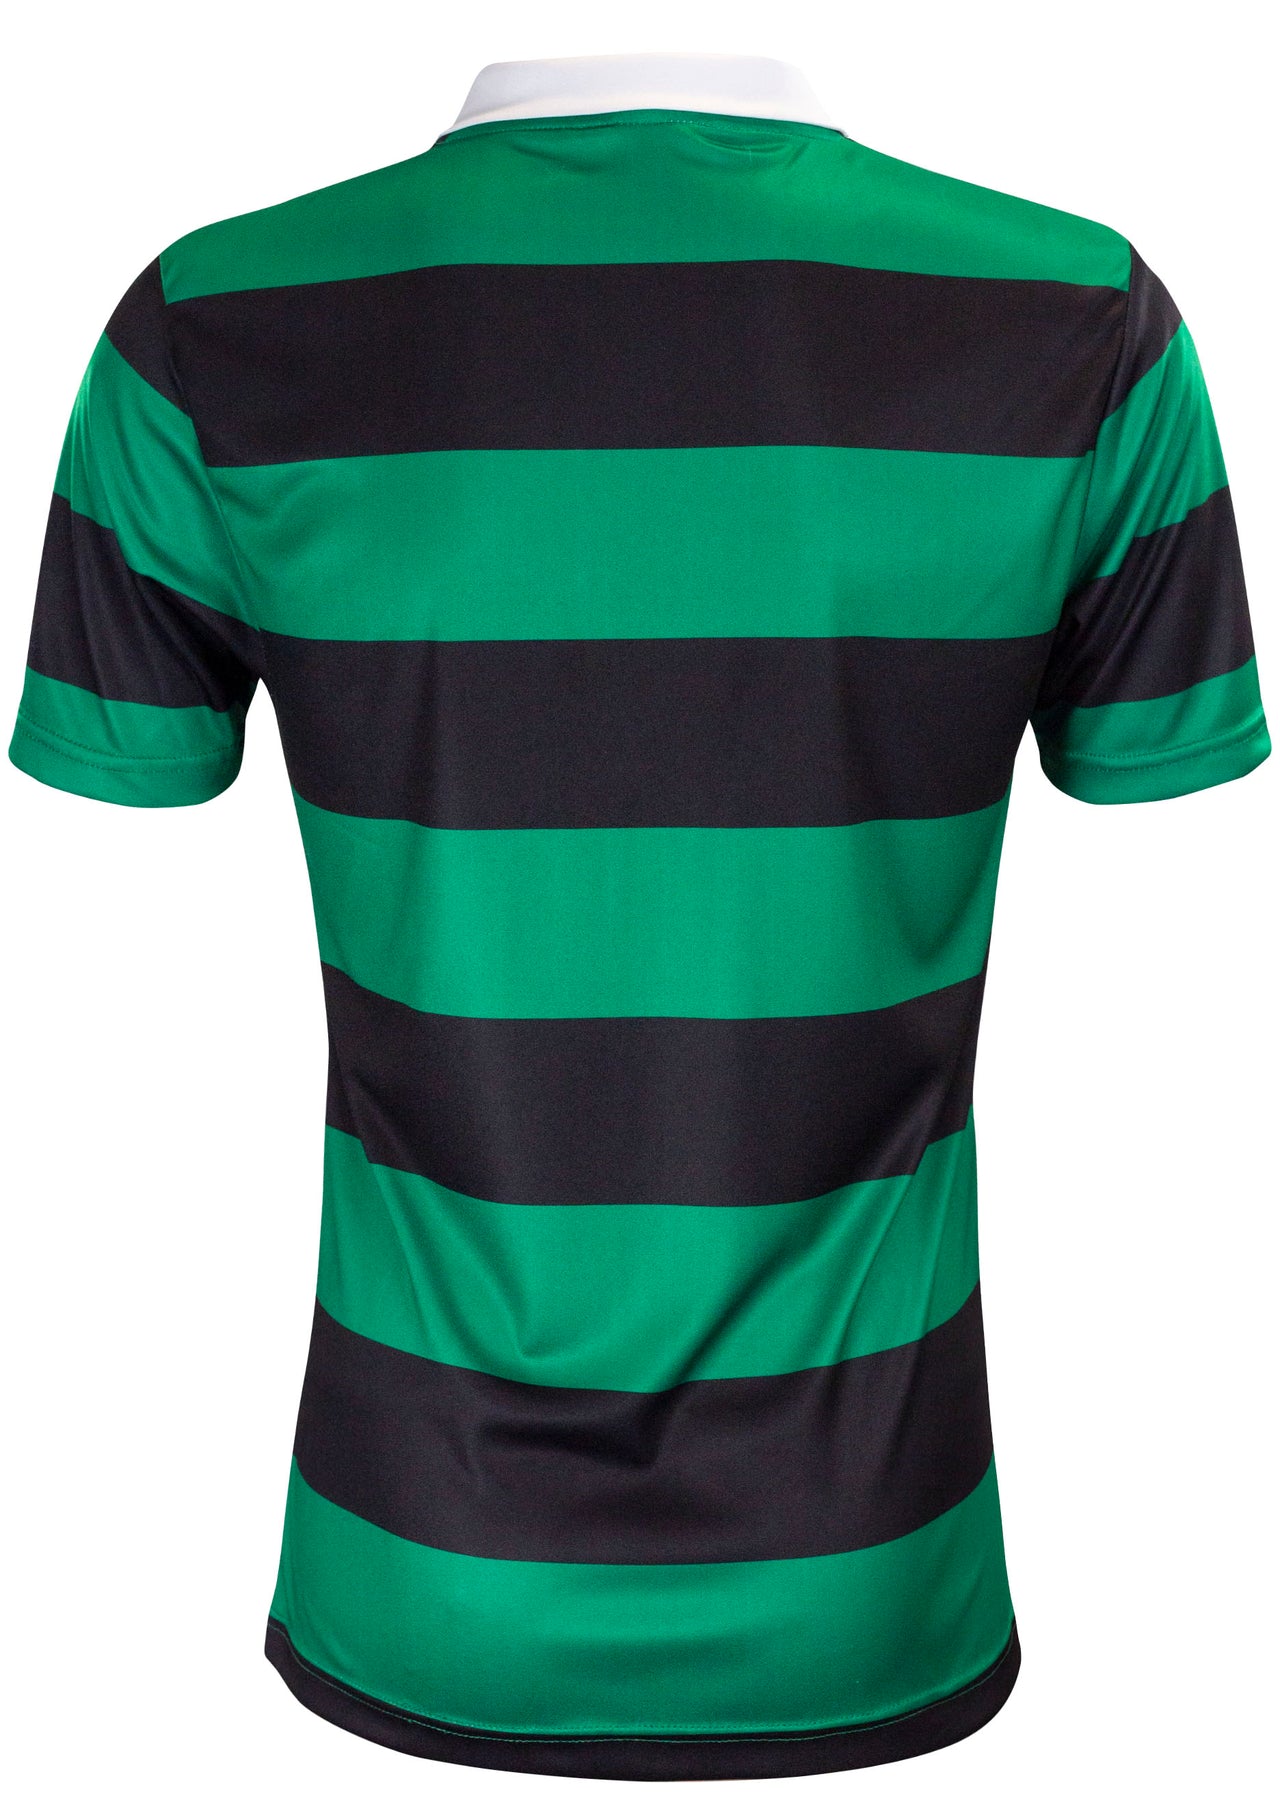 Killeavy CLG Retro Hooped Jersey Player Fit Adult